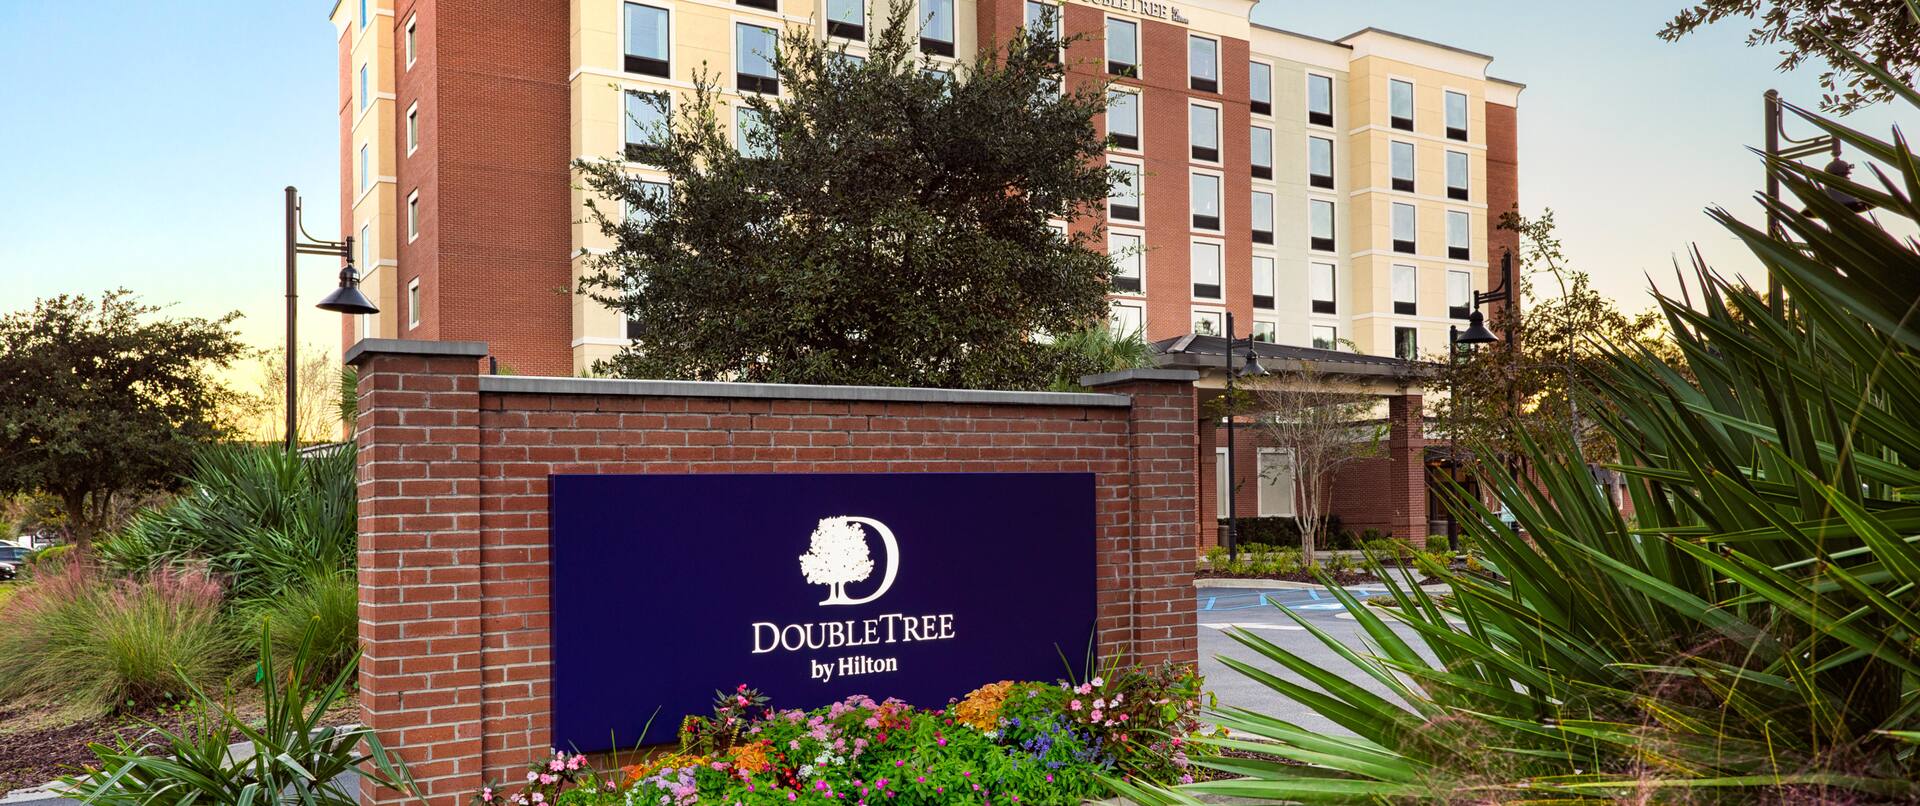 DoubleTree by Hilton Charleston Mount Pleasant Hotel Sign and Exterior